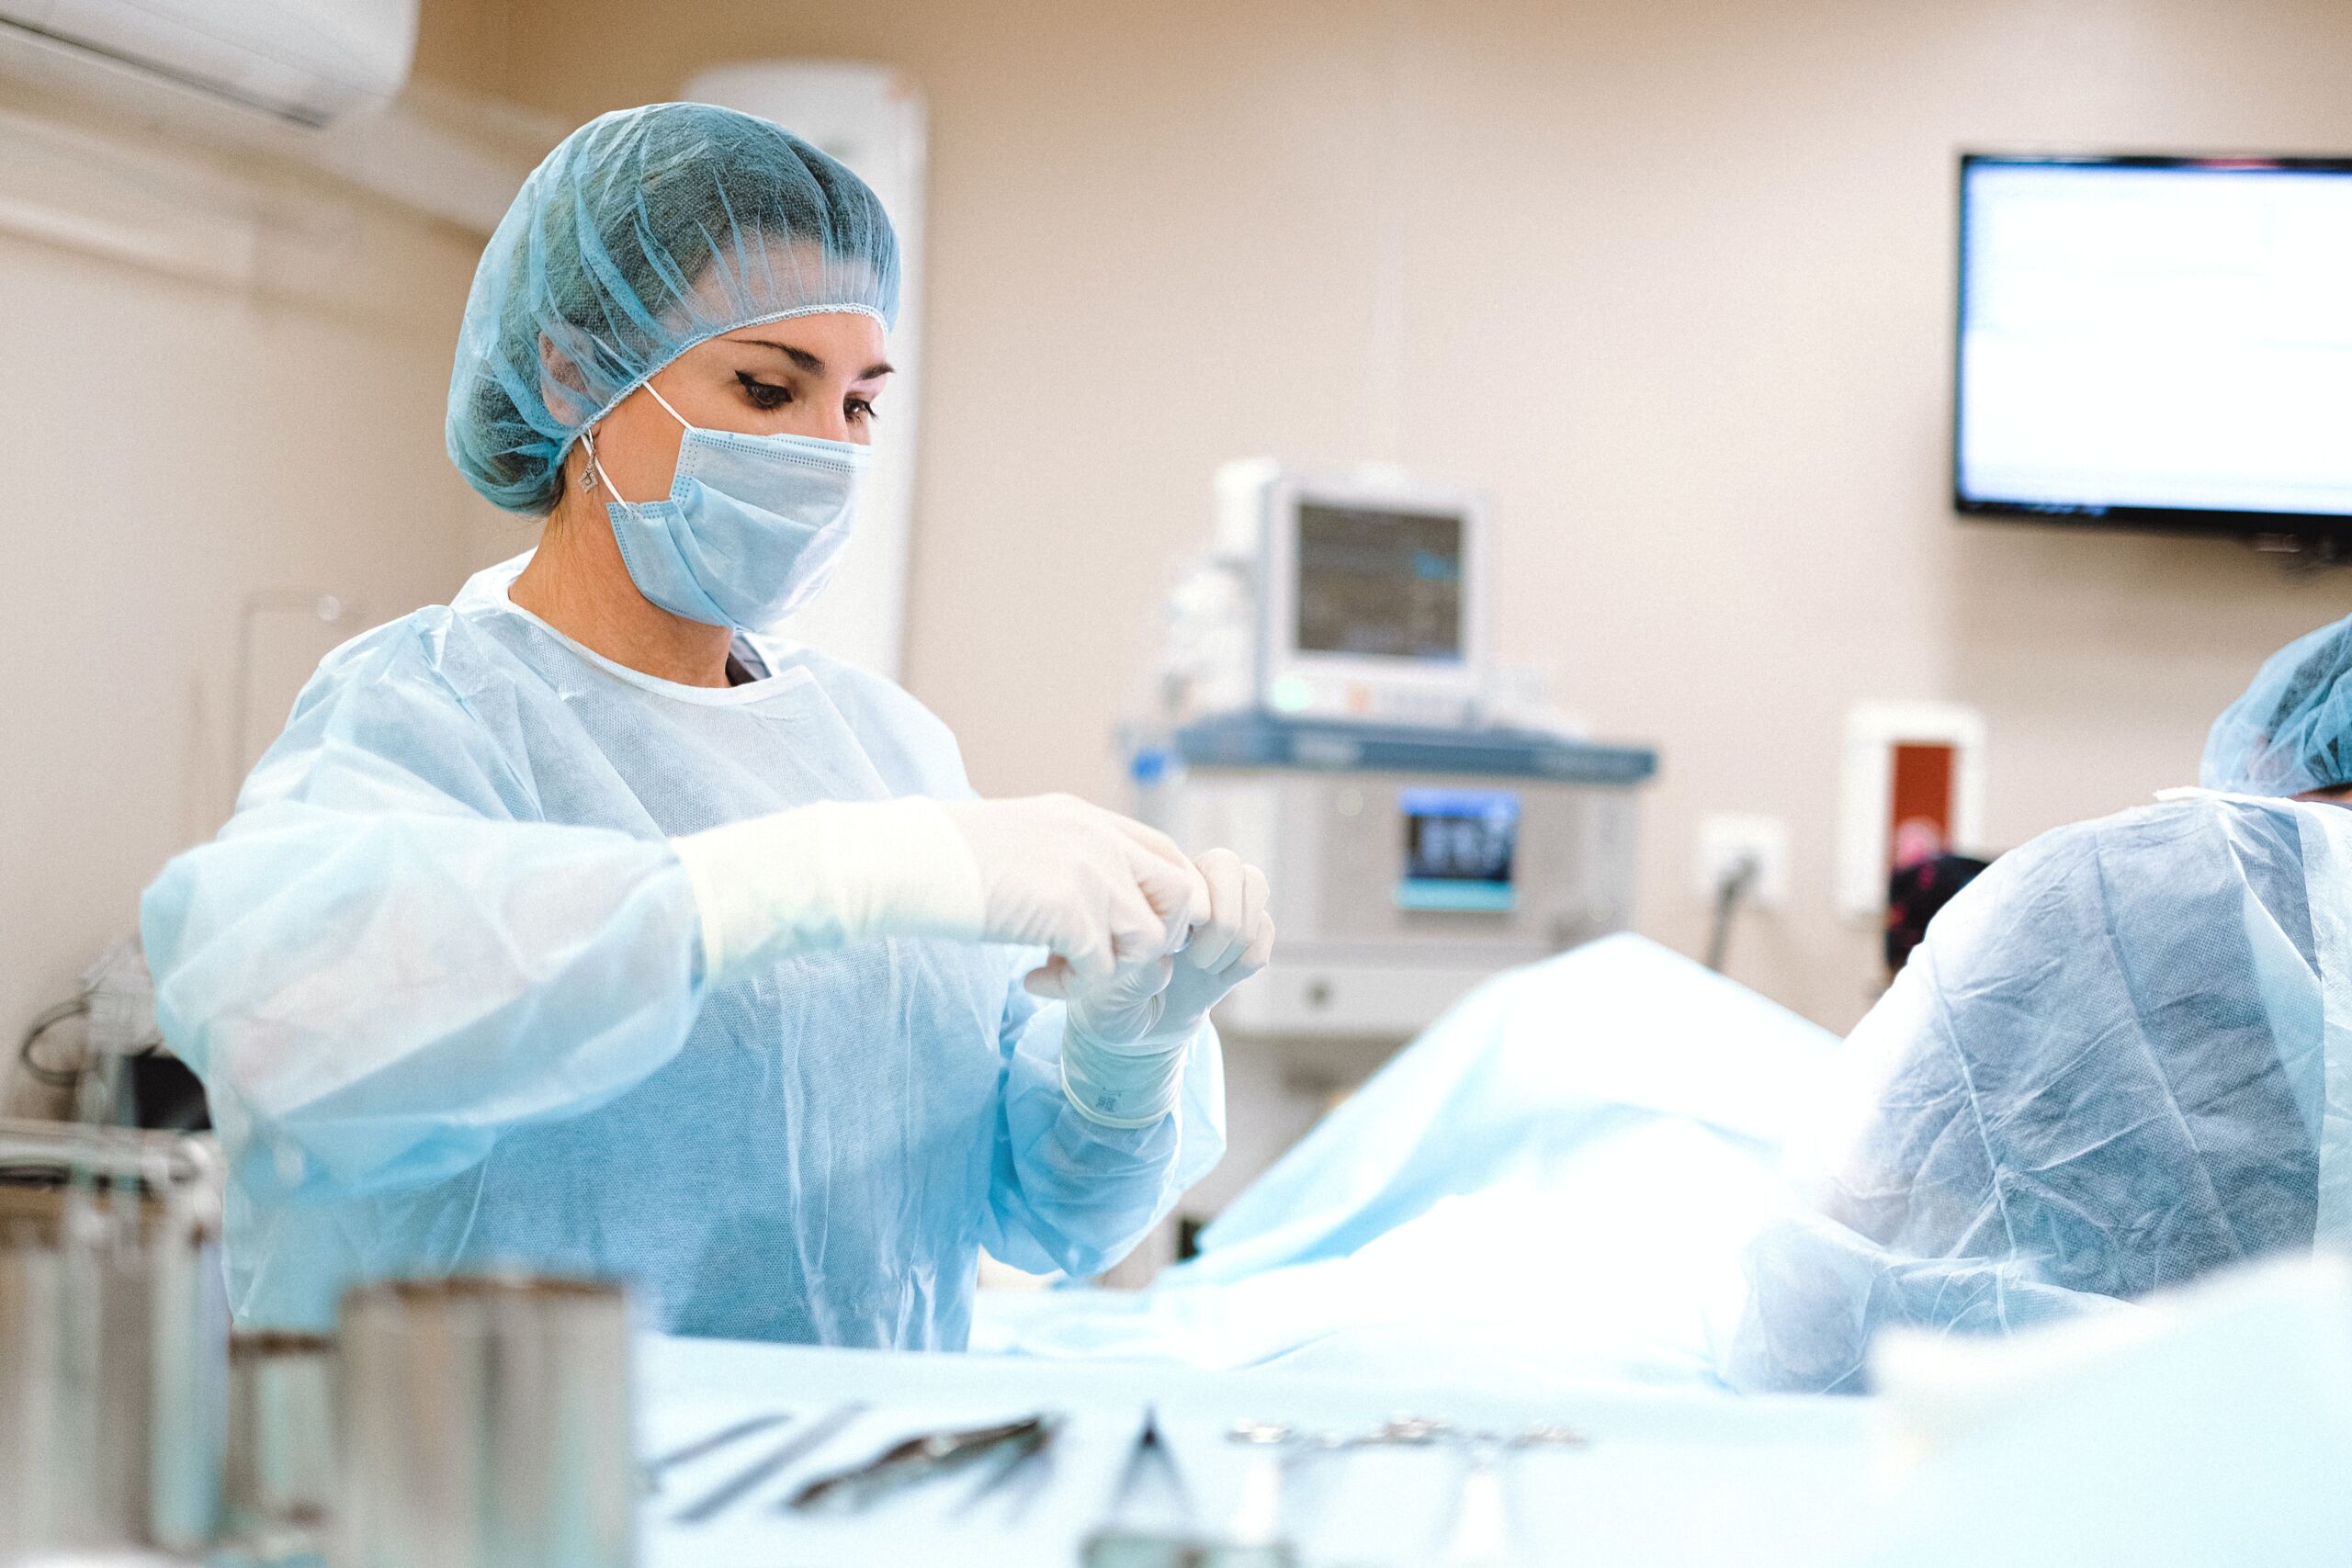 A woman in a surgical mask and gown is standing over a hospital bed with a surgical tool in her gloved hands